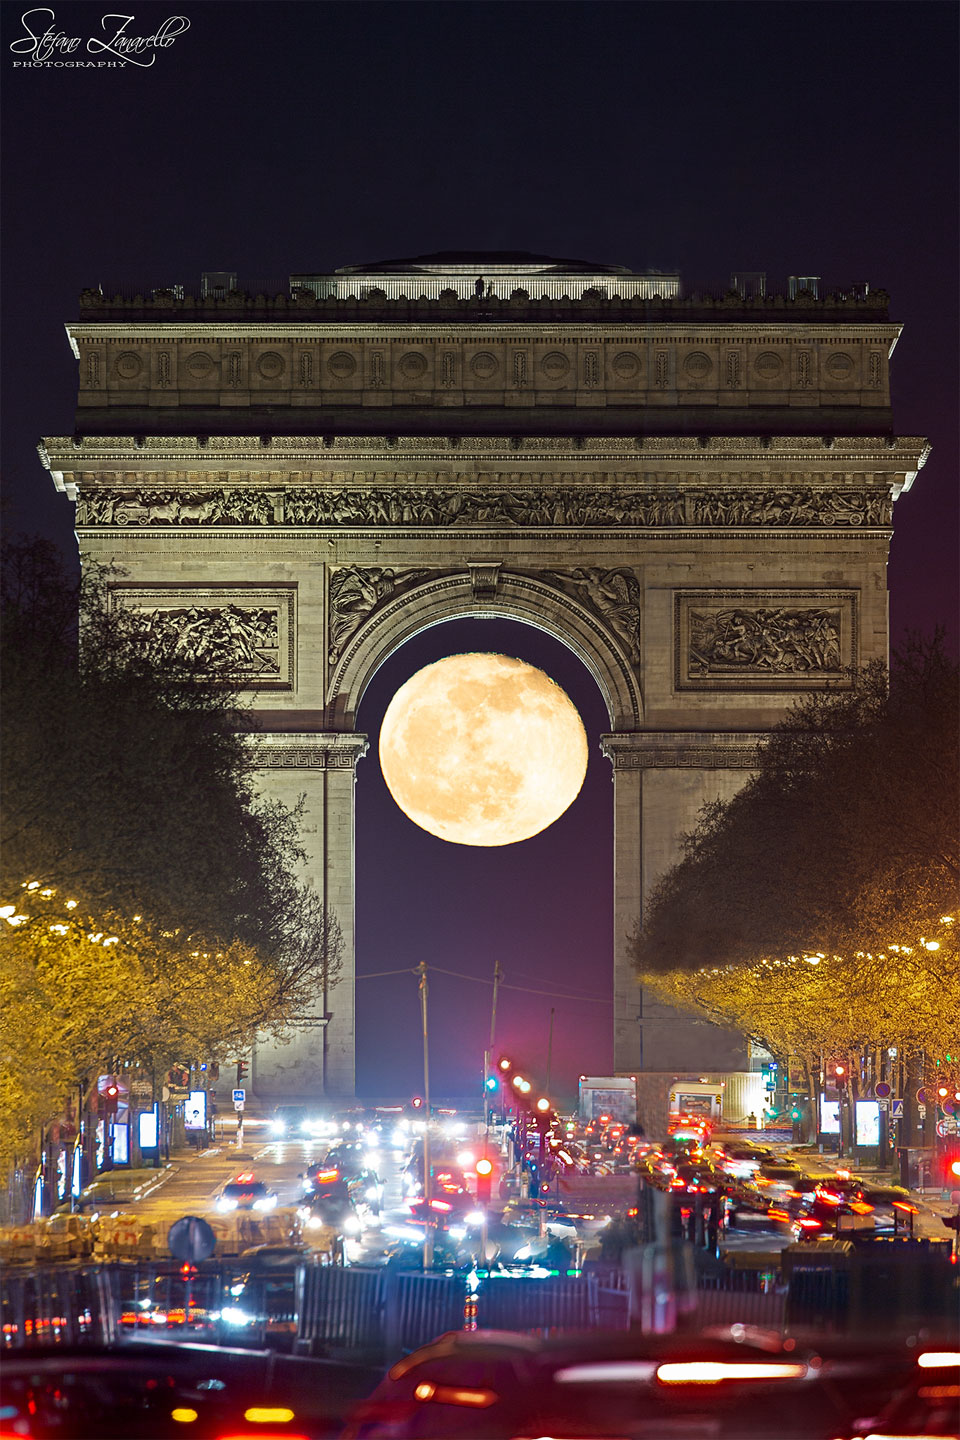 A nearly full Moon is seen through the famous Arc de Triomphi
with trees and cars lining the foreground.
Please see the explanation for more detailed information.